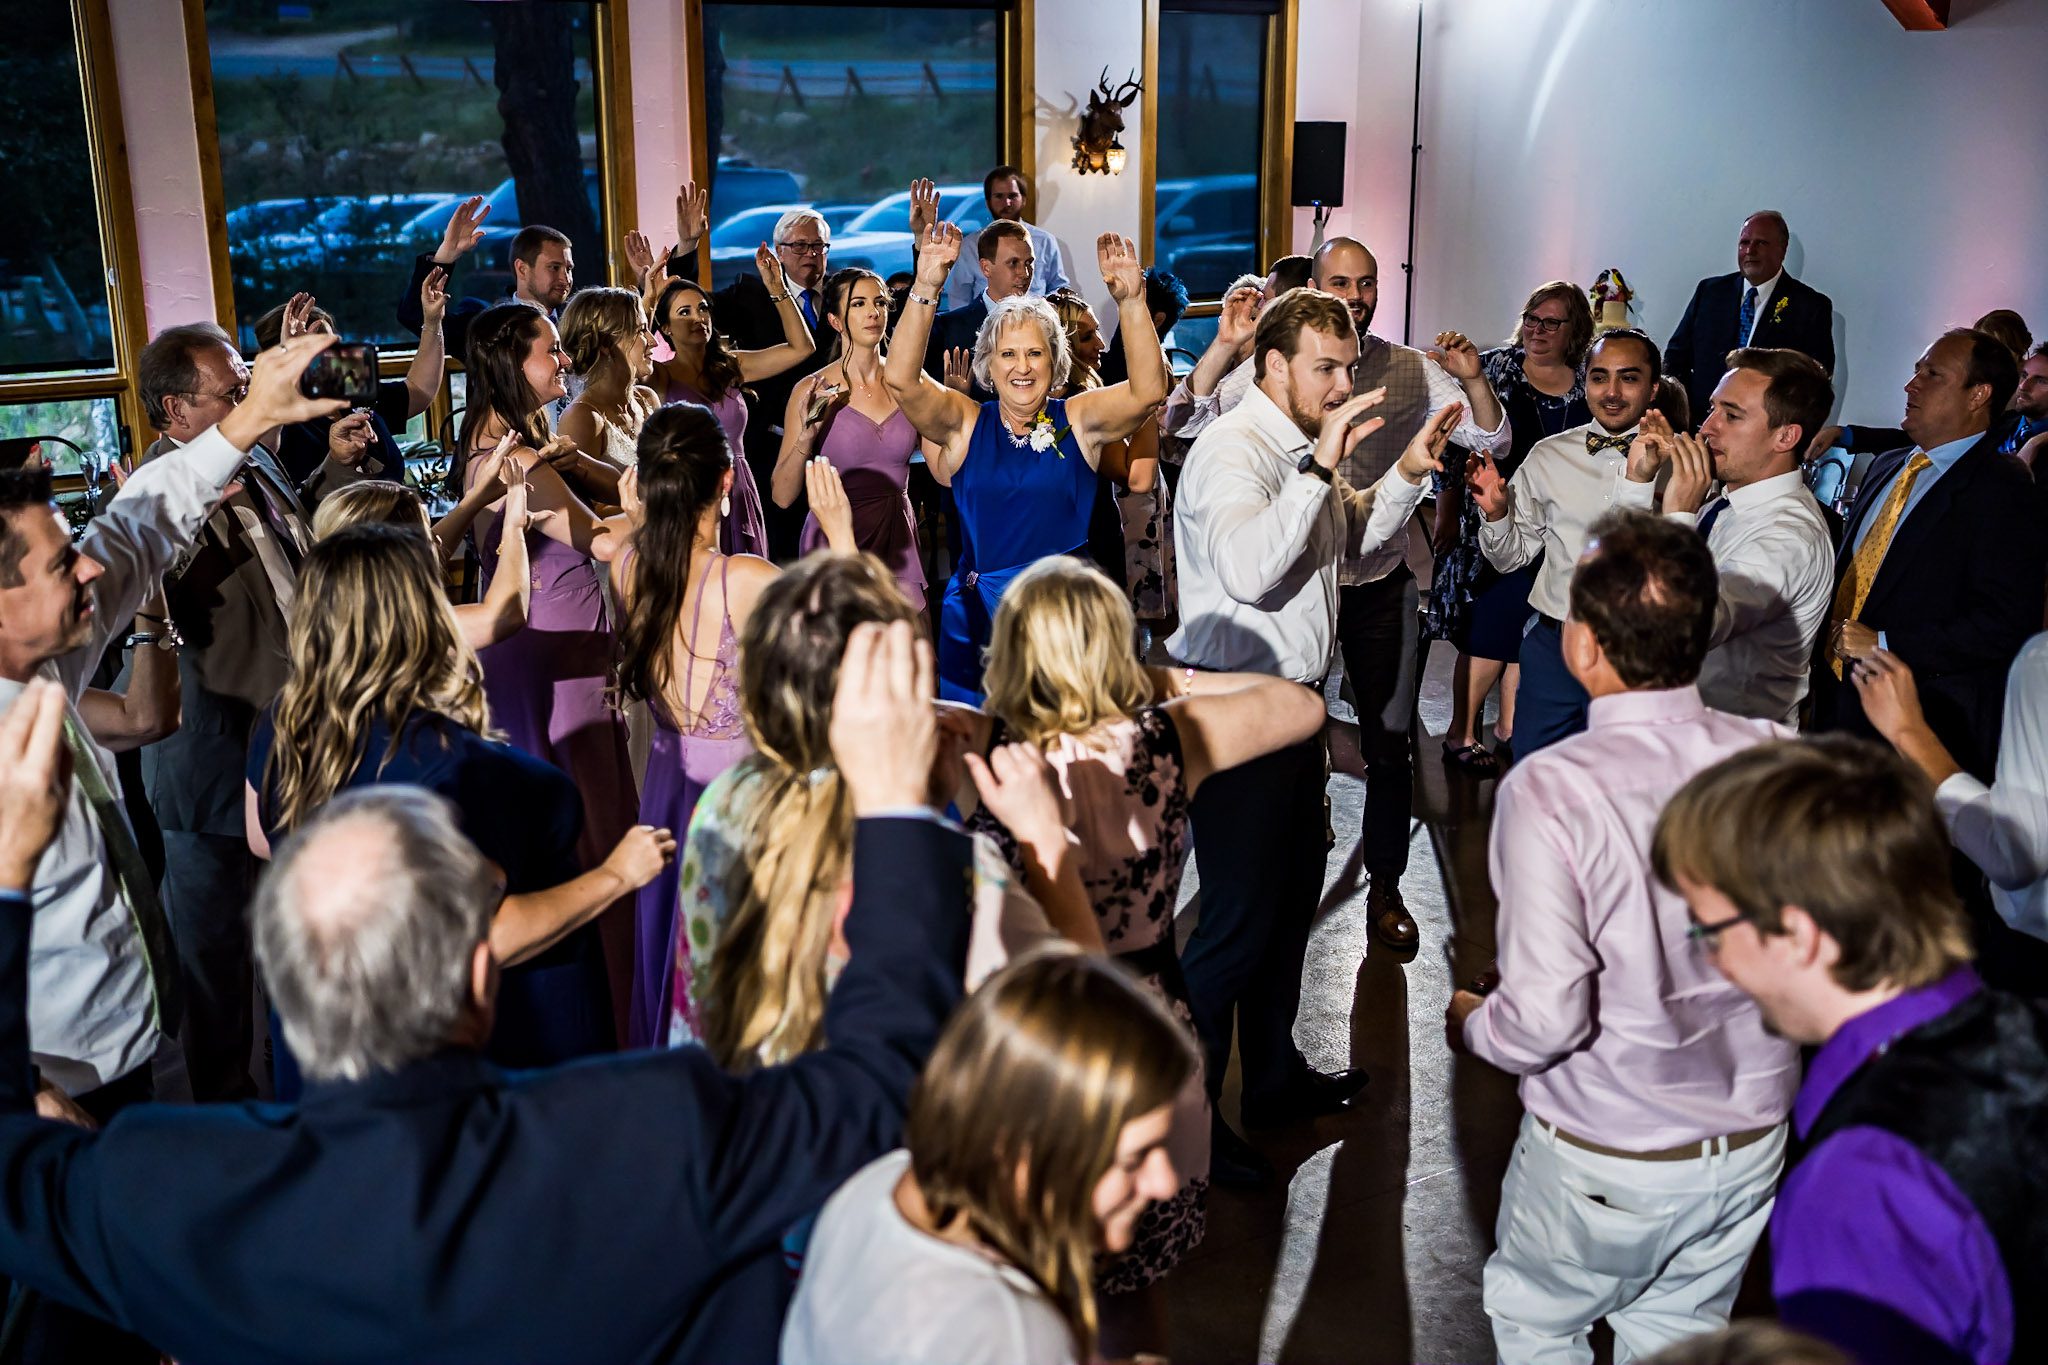 Fun and colorful summer wedding at The Landing in Estes Park Colorado by Bonnie Photo